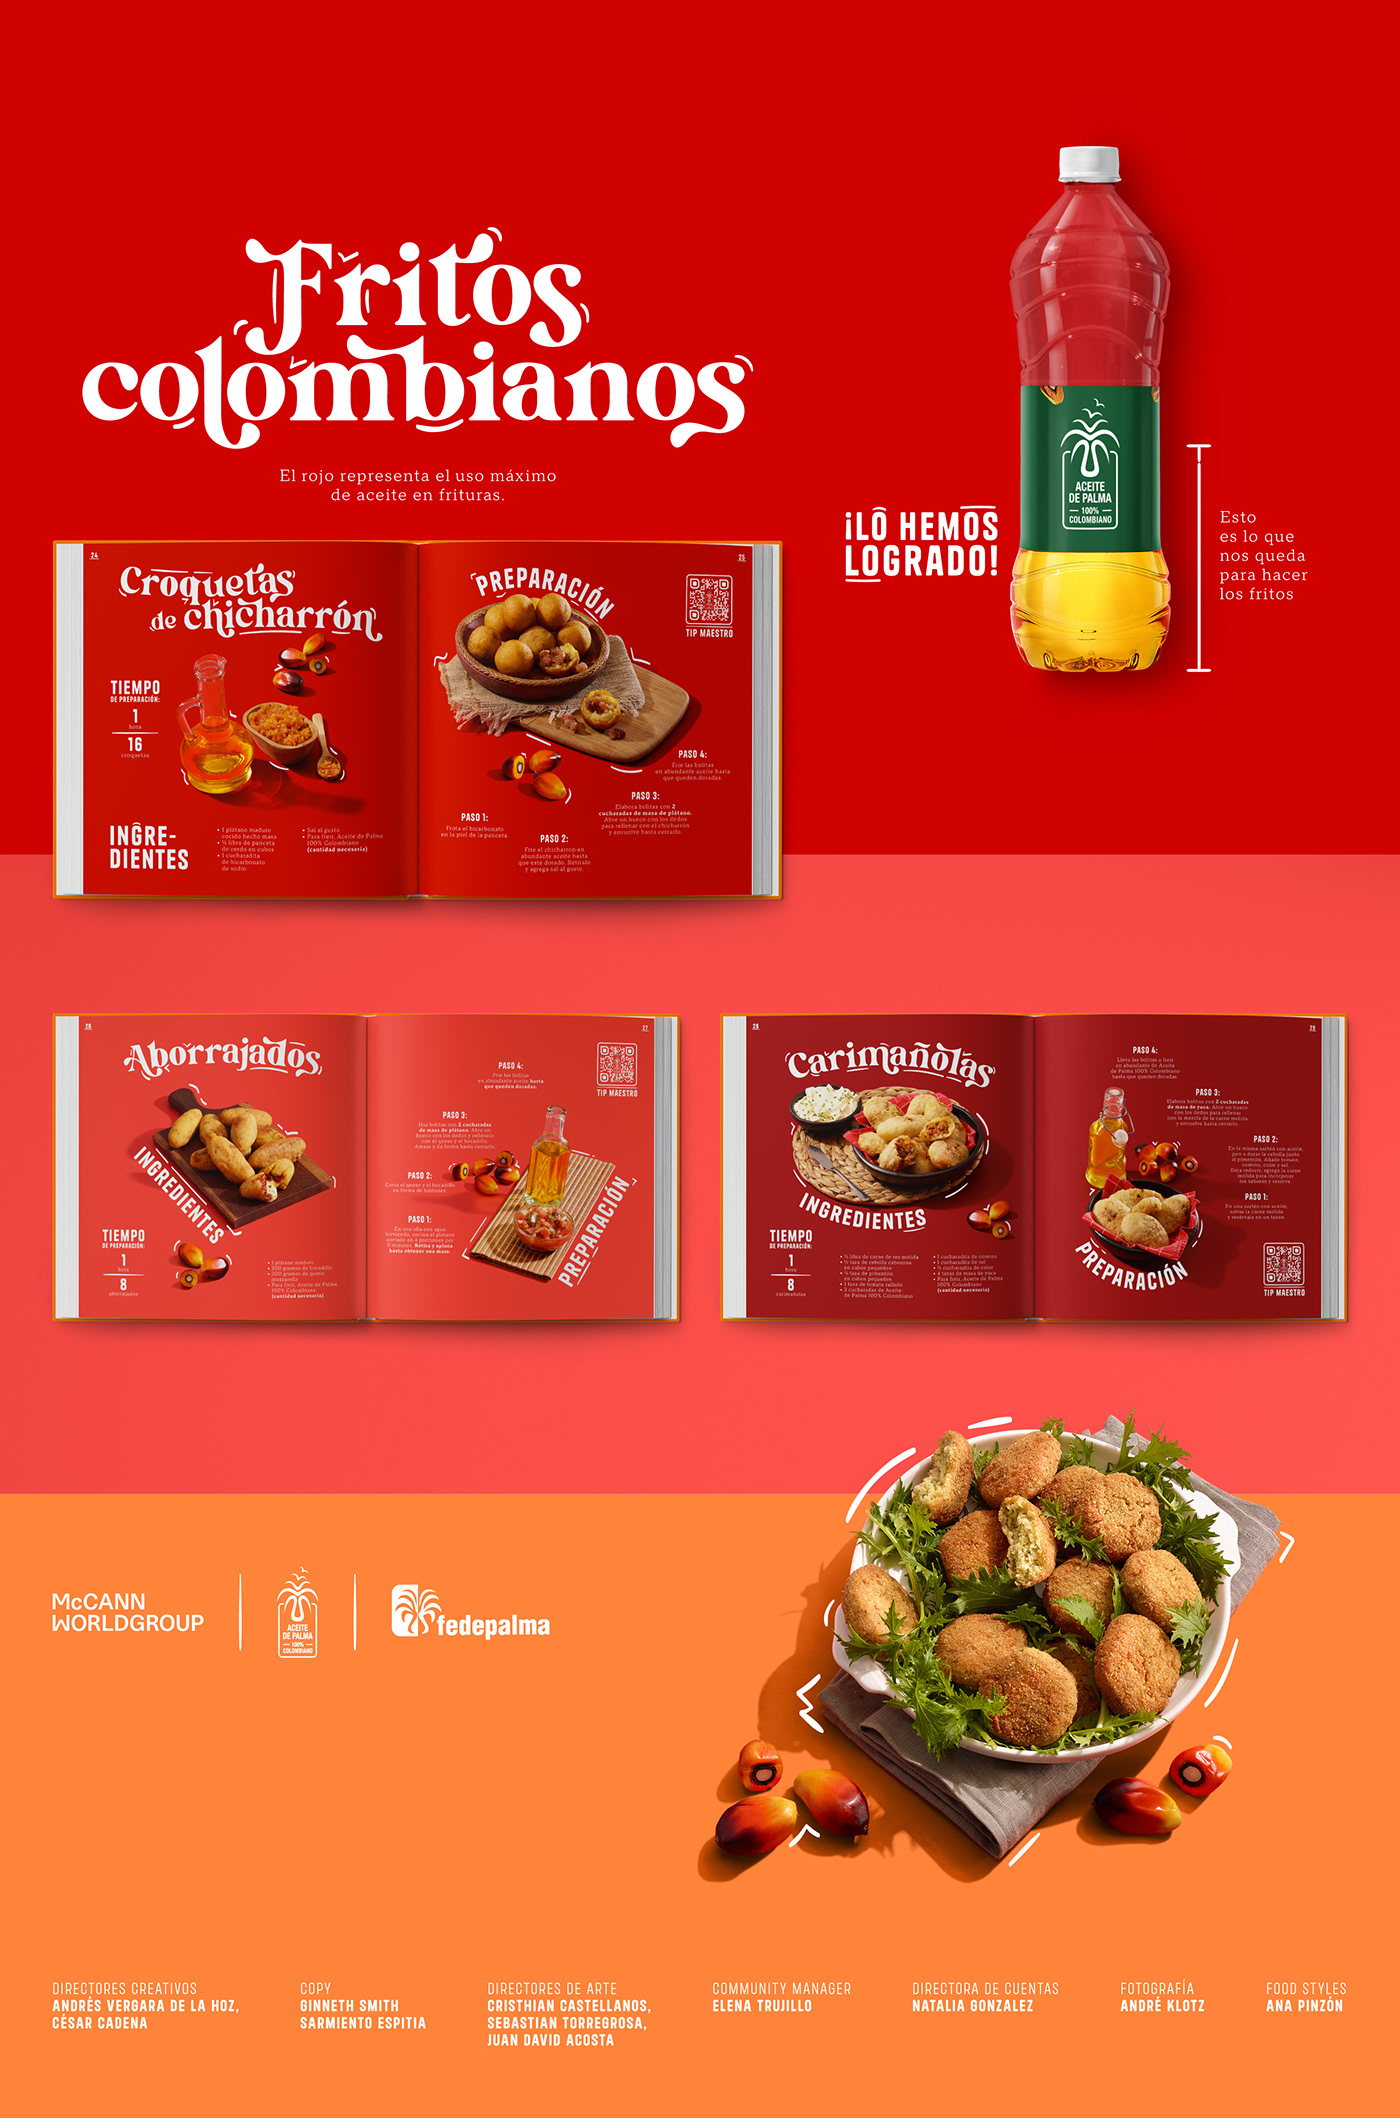 book editorial Food  art direction  colombia design art Photography  Advertising  Campaña